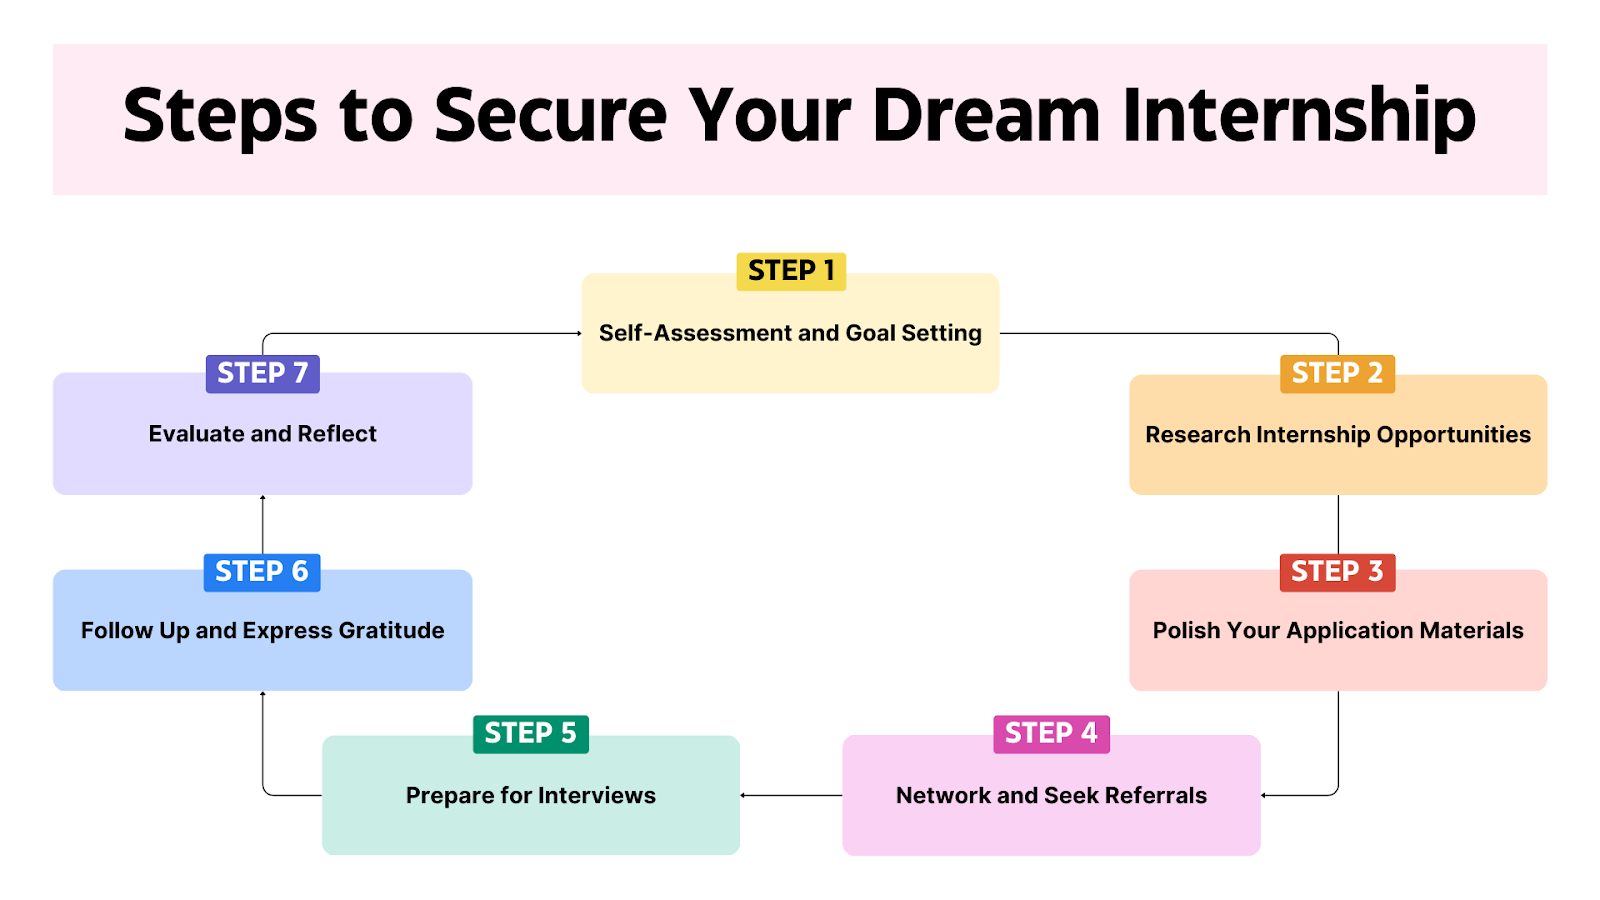 How Can Students Secure an Internship? explained in Image 